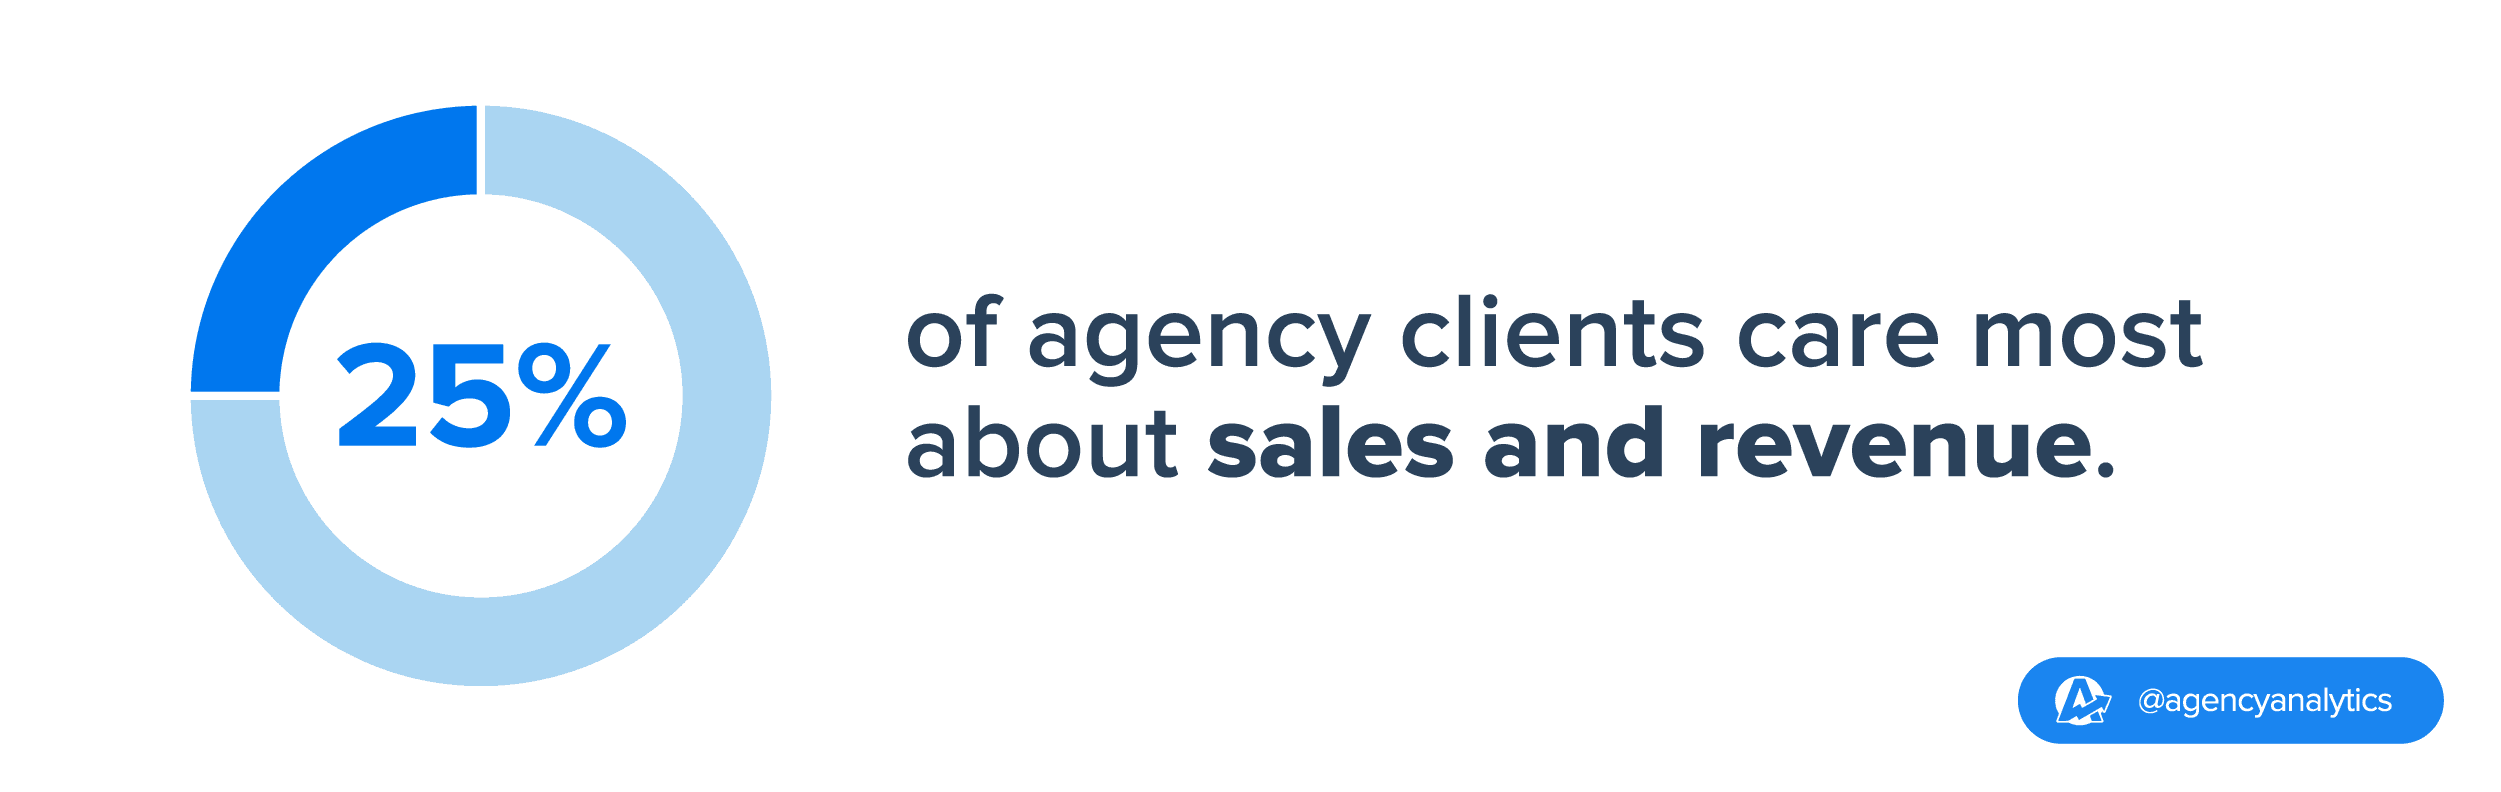 stat on percentage of clients caring about sales and revenue in their client reporting 